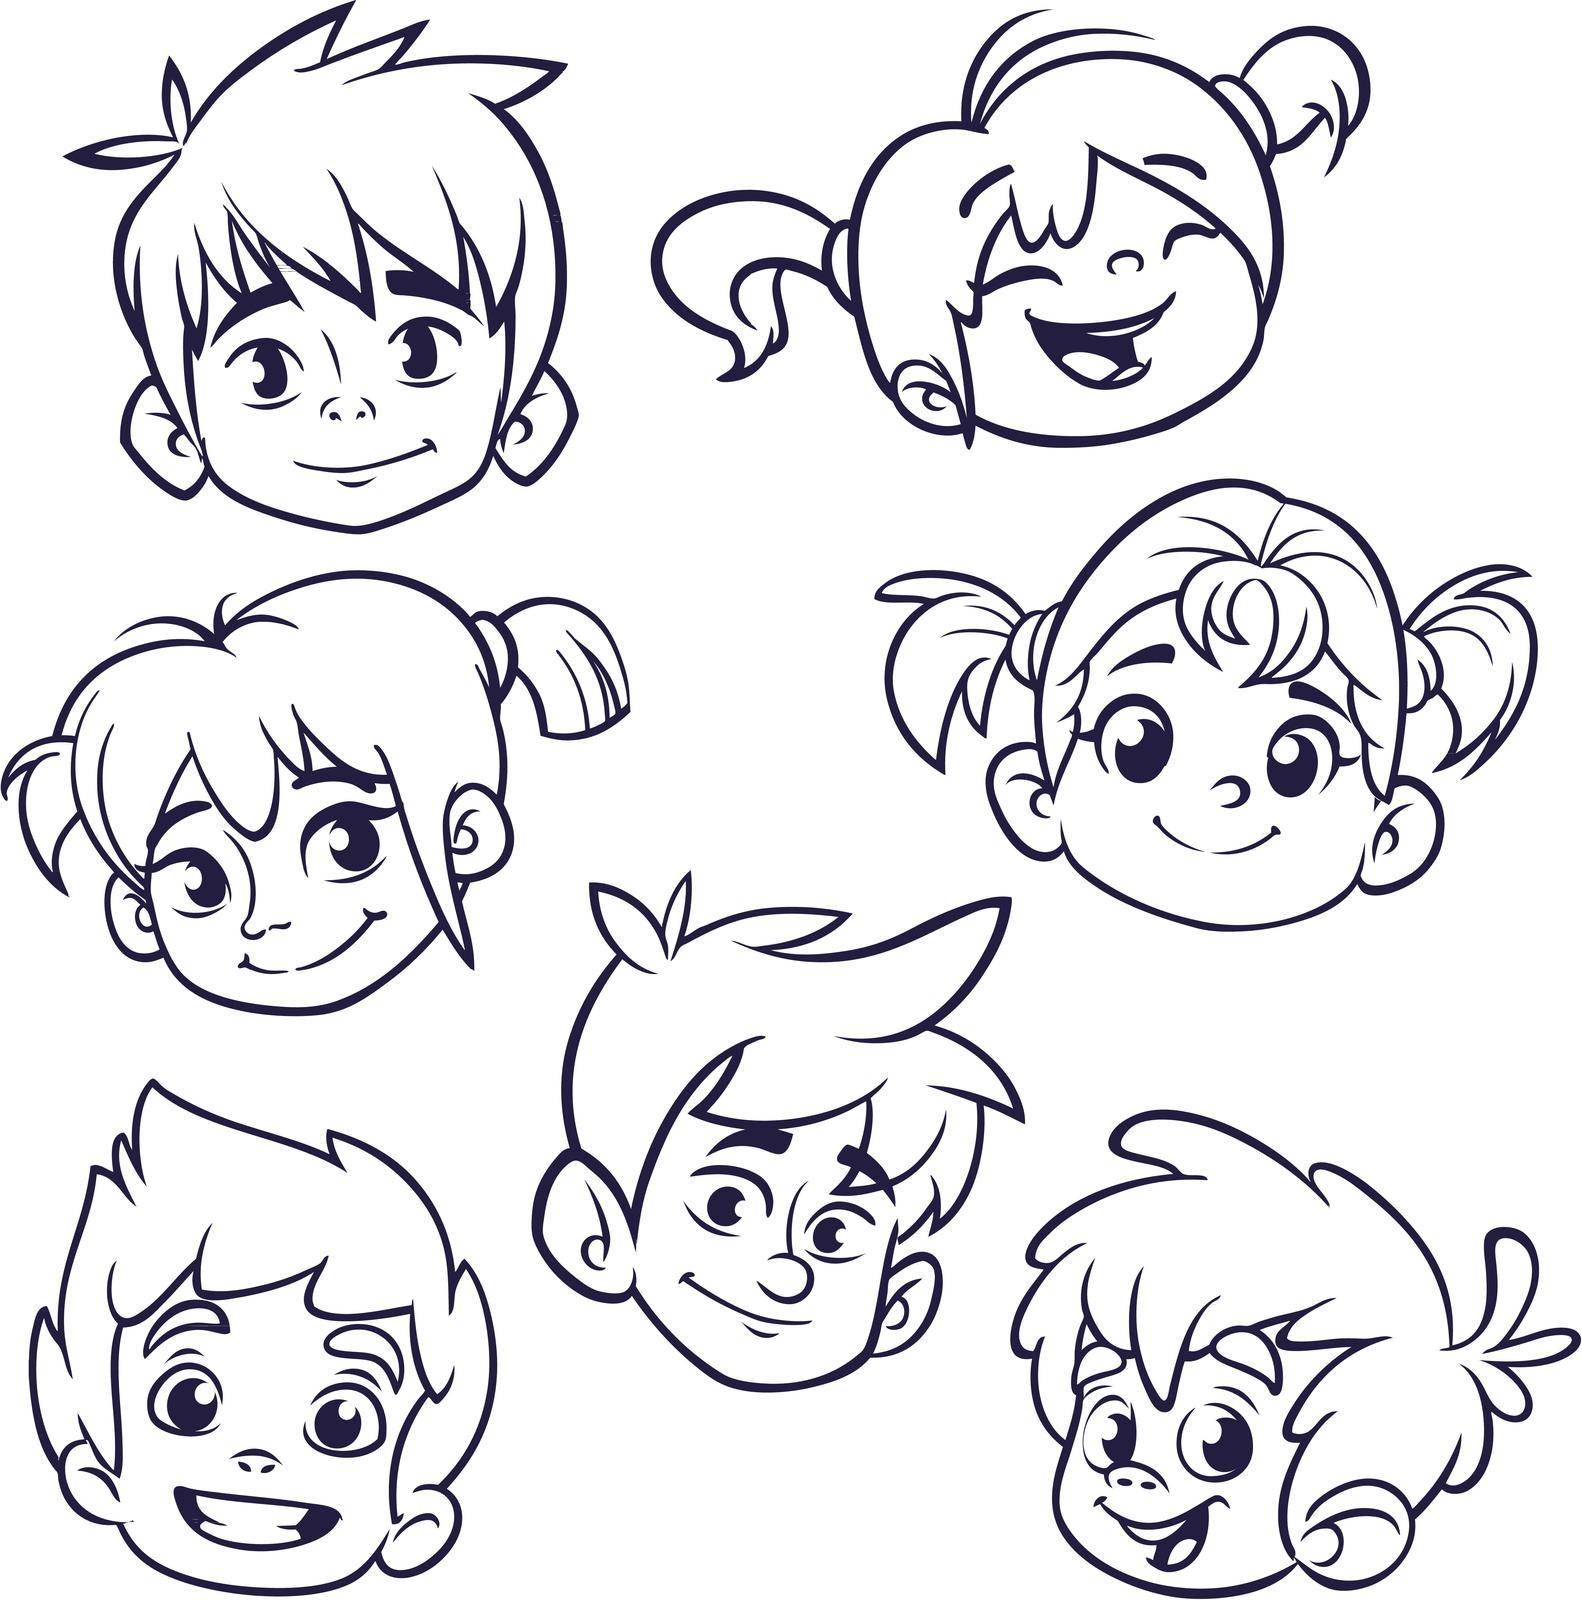 Cartoon child face icons. Vector set of childrens or teenagers heads outlined. Cutout illustration